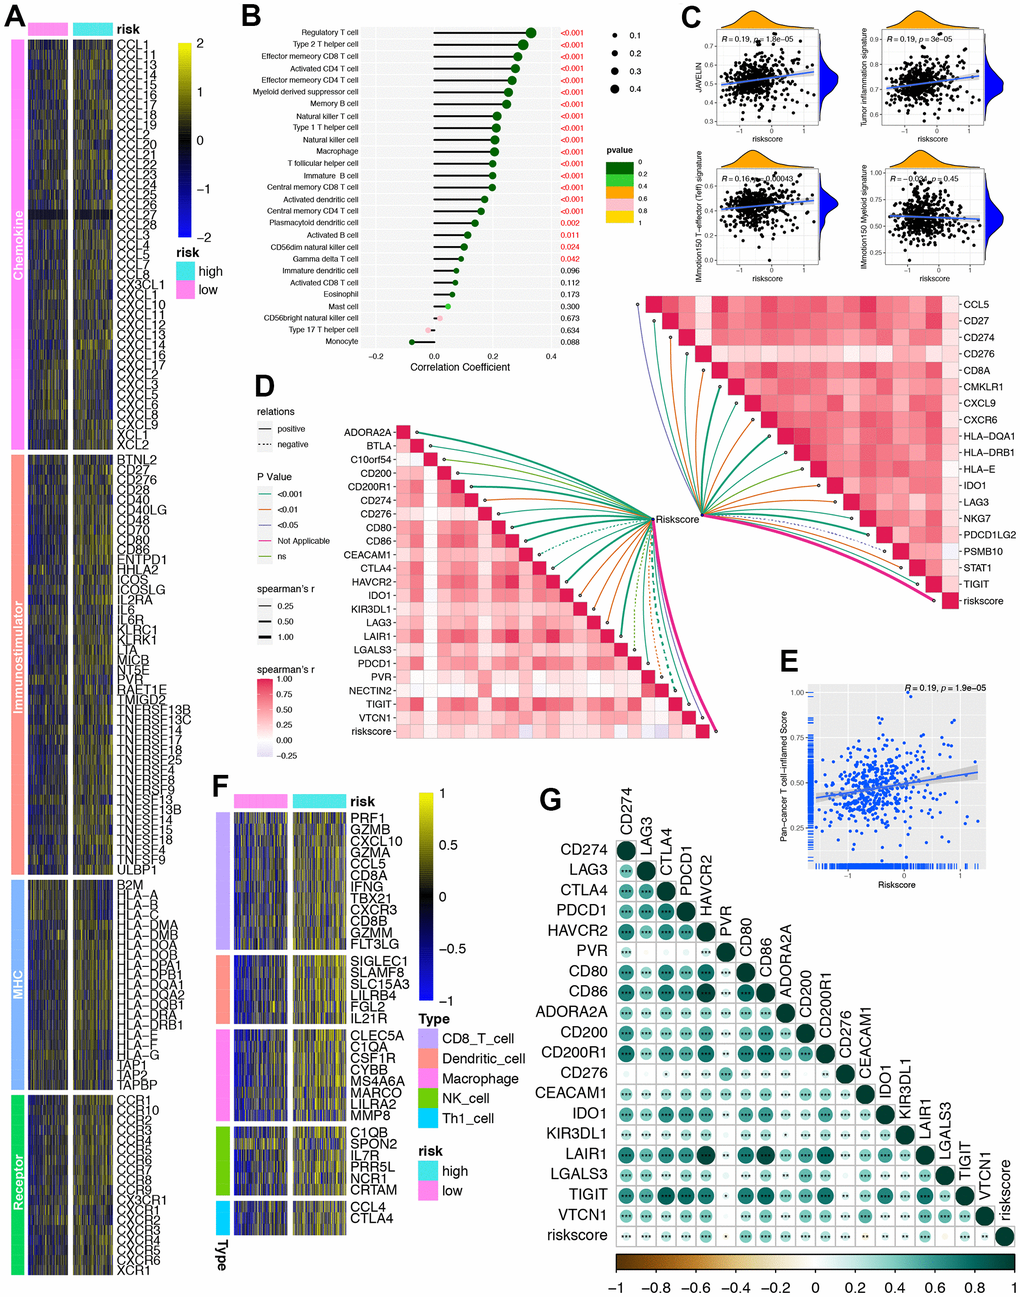 Developing a ORGs signature for individual patient’s tumor microenvironment (TME) phenotypes evaluation. (A) Differences in the expression of 122 immunomodulators (chemokine, receptor, MHC and immunostimulators) between high-risk and low-risk cohorts in PRAD. (B) Correlation between ORGs signature and immune cells infiltration in TCGA-PRAD. (C) Correction between ORGs signature, JAVELIN, Tumor inflammation, IMmotion 150 T-effector response and IMmotion 150 Myeloid gene expression signatures respectively. (D) Correlation between ORGs signature, immune checkpoint (ICI) genes (topper right) and tumor inflammation signature (TIS) genes (lower left) respectively. (E) Correlation between ORGs signature and pan-cancer T cell inflamed score. (F) Heatmap of effect genes of CD8+ T cell, dendritic cell (DC), macrophage, natural killer (NK) cell and type 1 T helper (Th1) cell between high-risk and low-risk ORGs signature cohorts. (G) Correlation between ORGs signature and the individual genes included in the T cell inflamed signature.